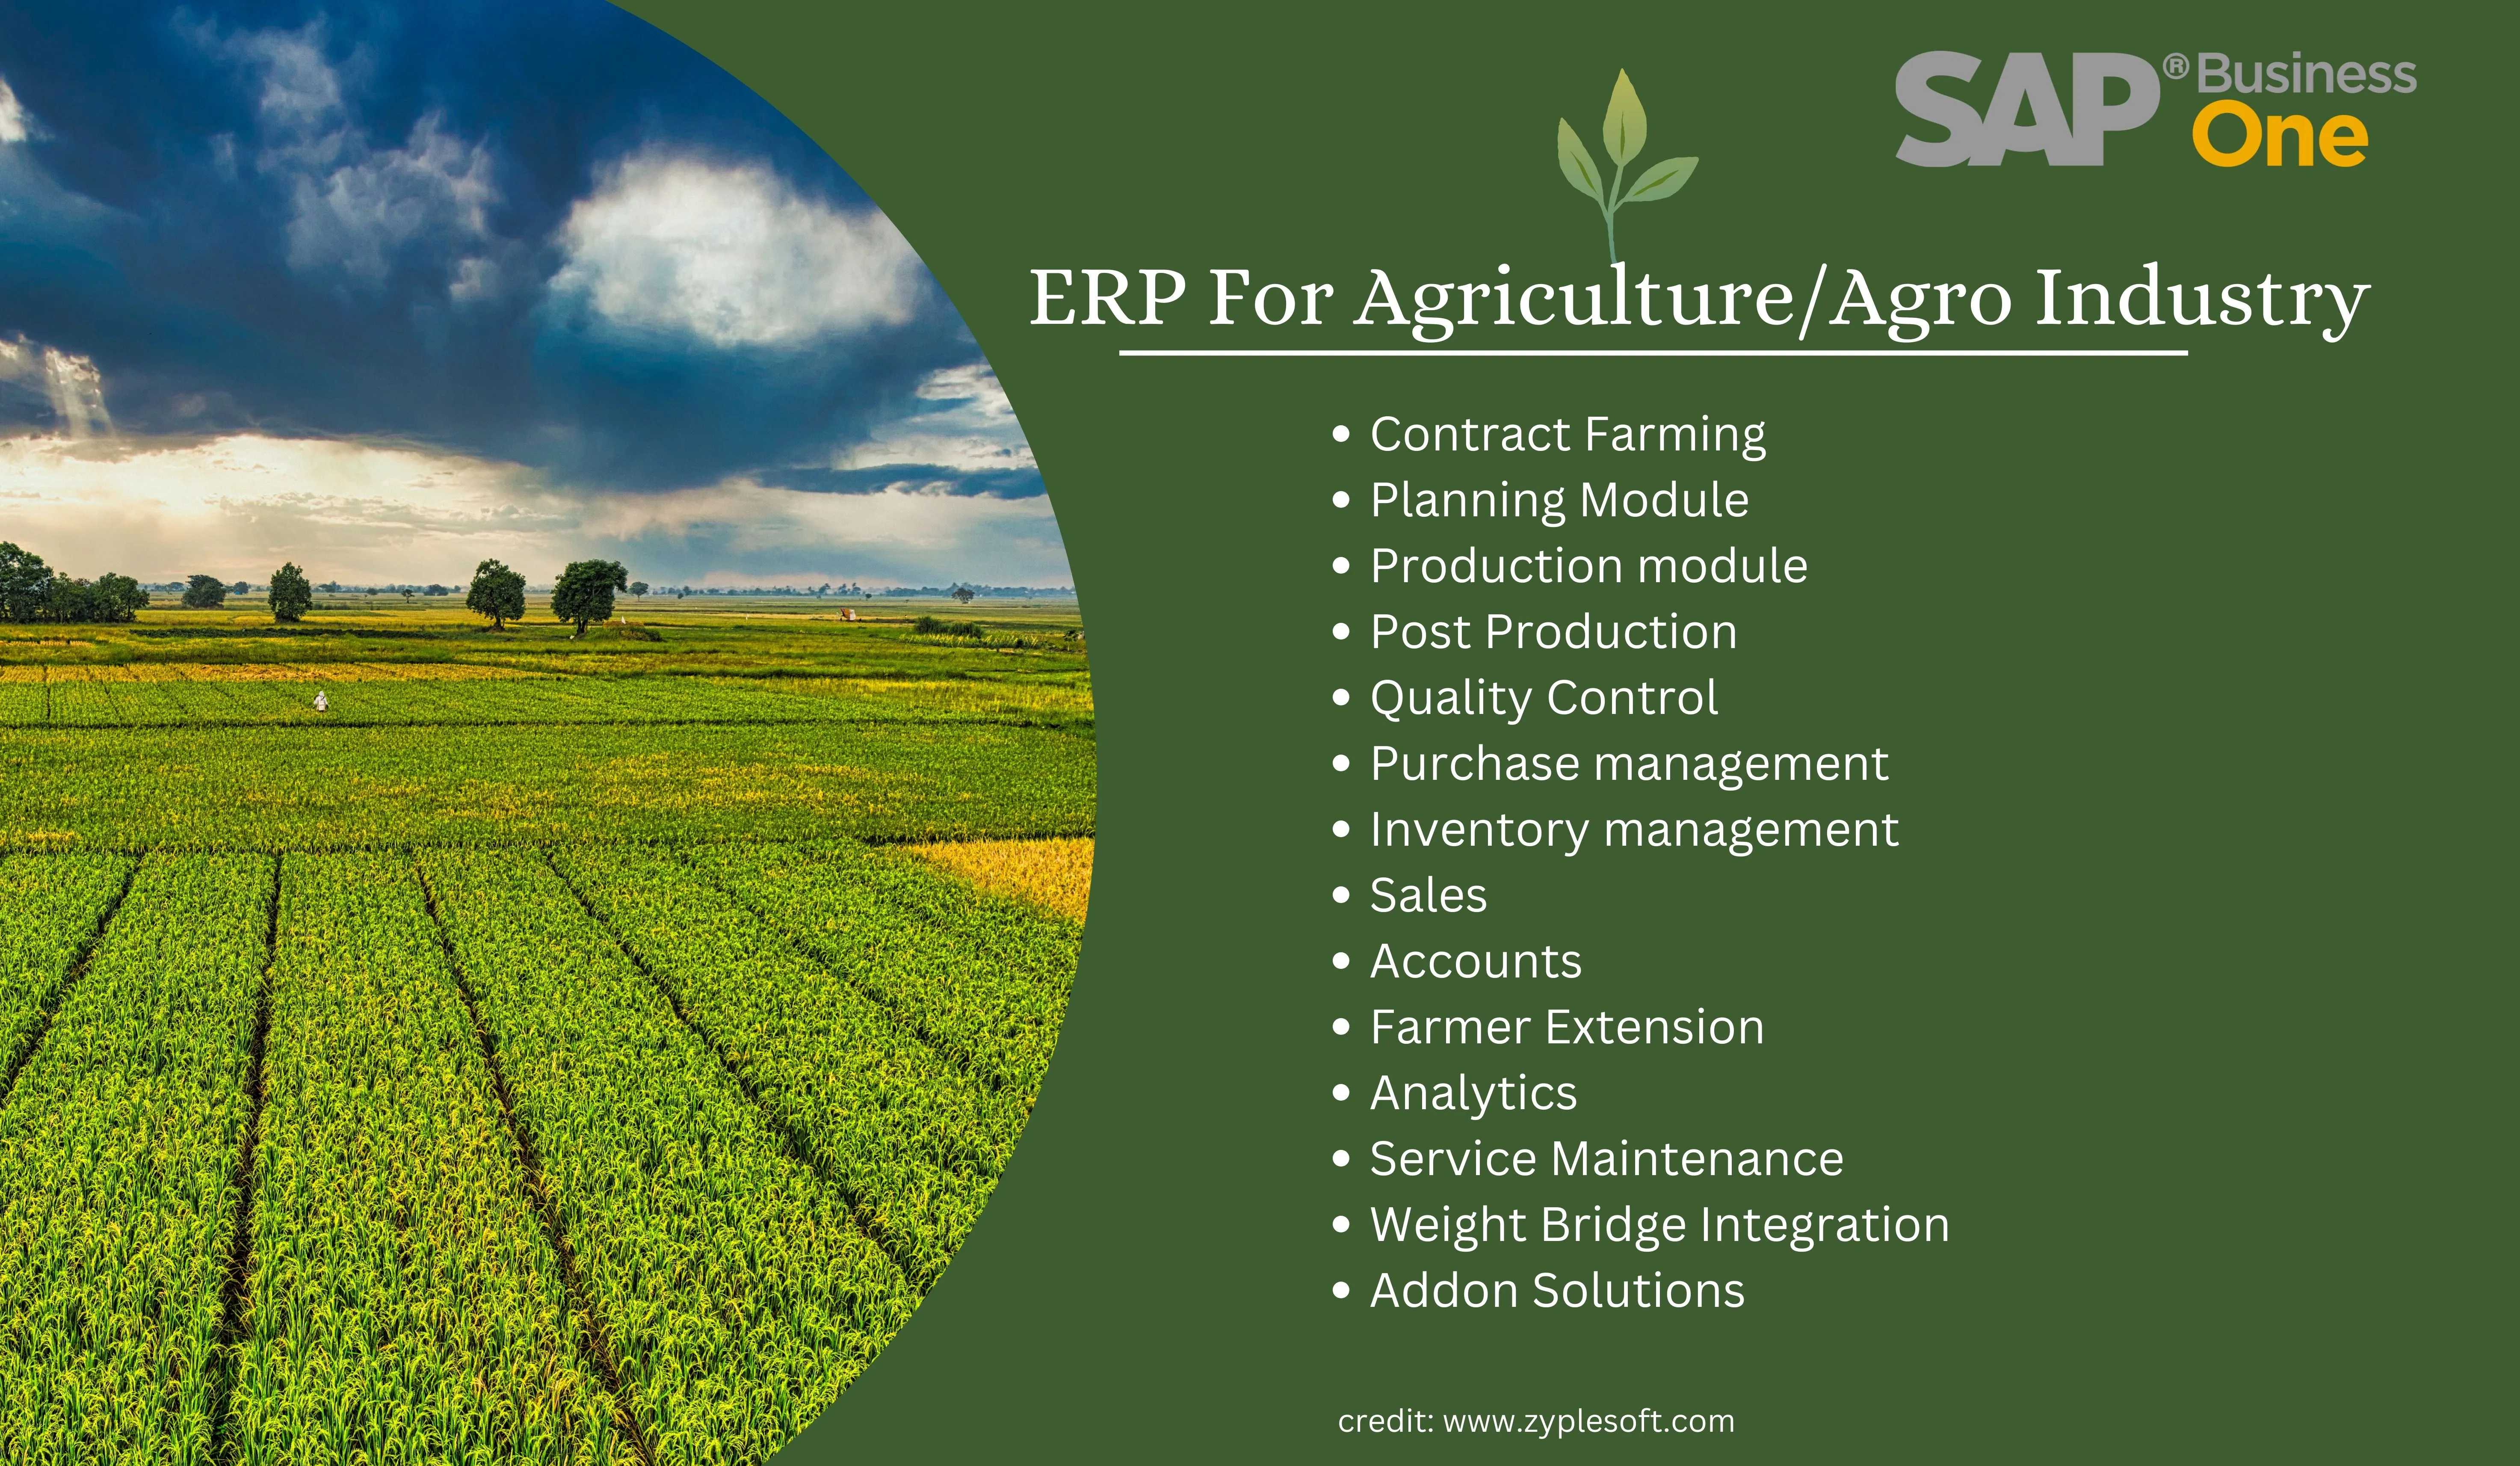 SAP Business One ERP for Agriculture industry